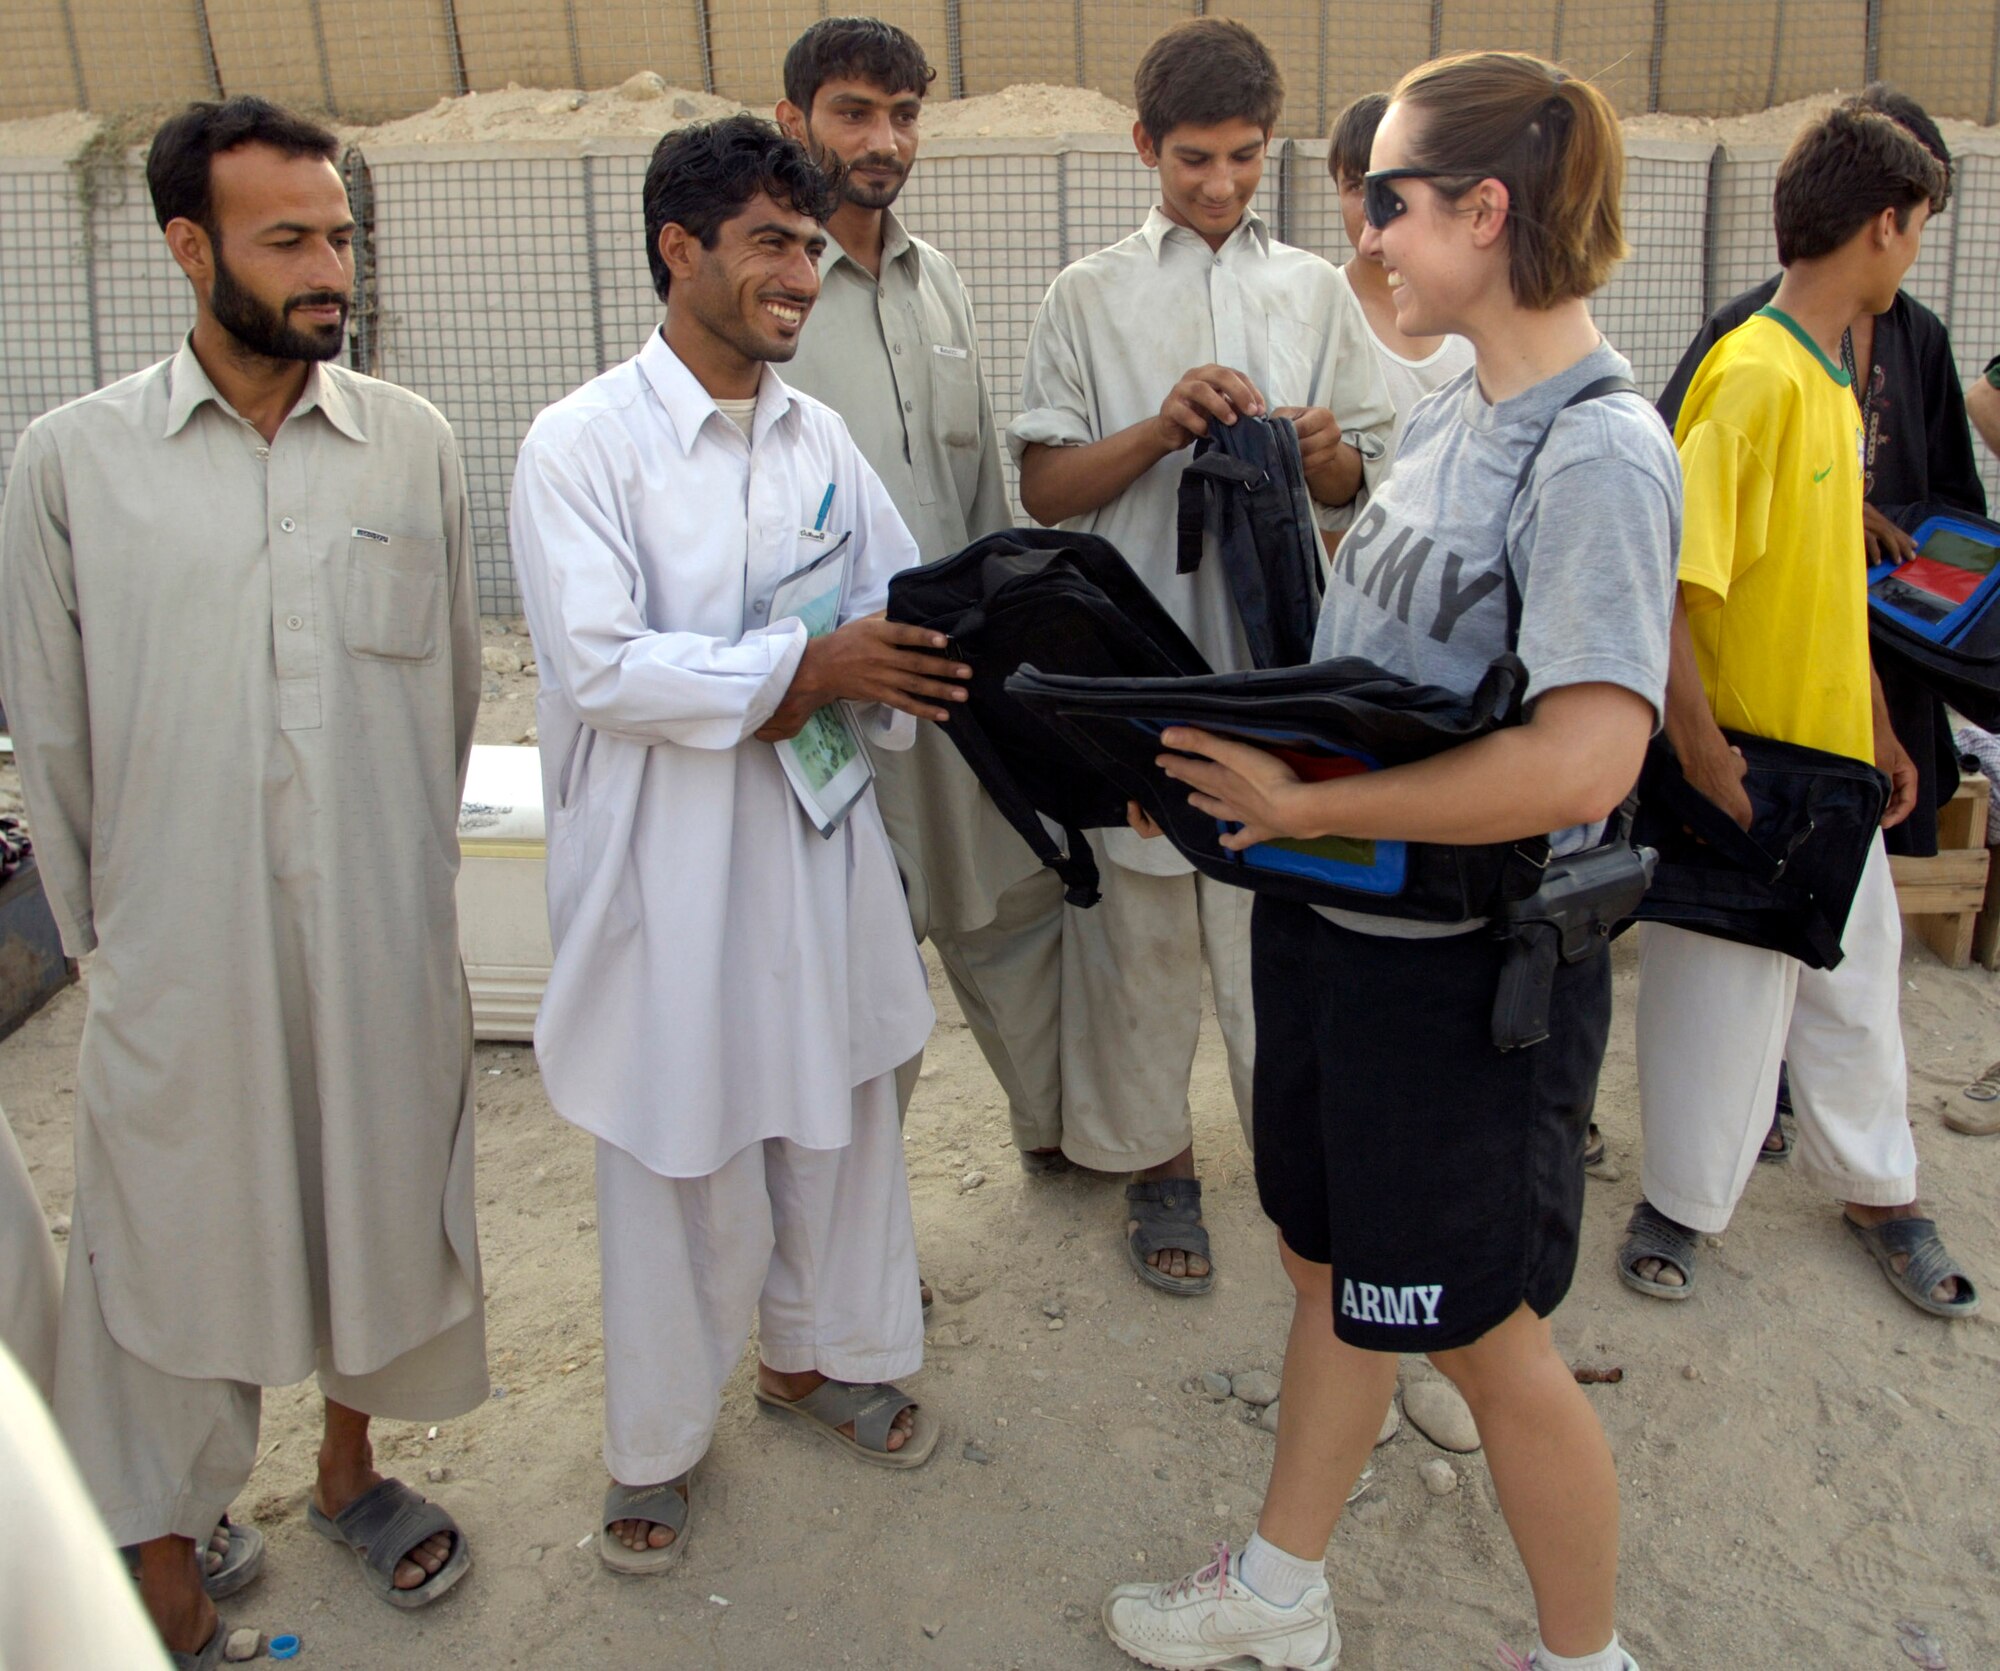 Army Sgt. Sam St. Pierre hands out book bags to the participants of a volleyball game hosted by Airmen and Soldiers Aug. 26 at Forward Operating Base Mehtar Lam, located in Afghanistan's Laghman Province. The weekly volleyball games are designed to bring area high school students from the province's five districts to the base to meet and interact with military members in a friendly atmosphere. Sergeant St. Pierre is a Provincial Reconstruction Team member and Army civil affairs specialist. (U.S. Air Force photo/Master Sgt. Jim Varhegyi) 
